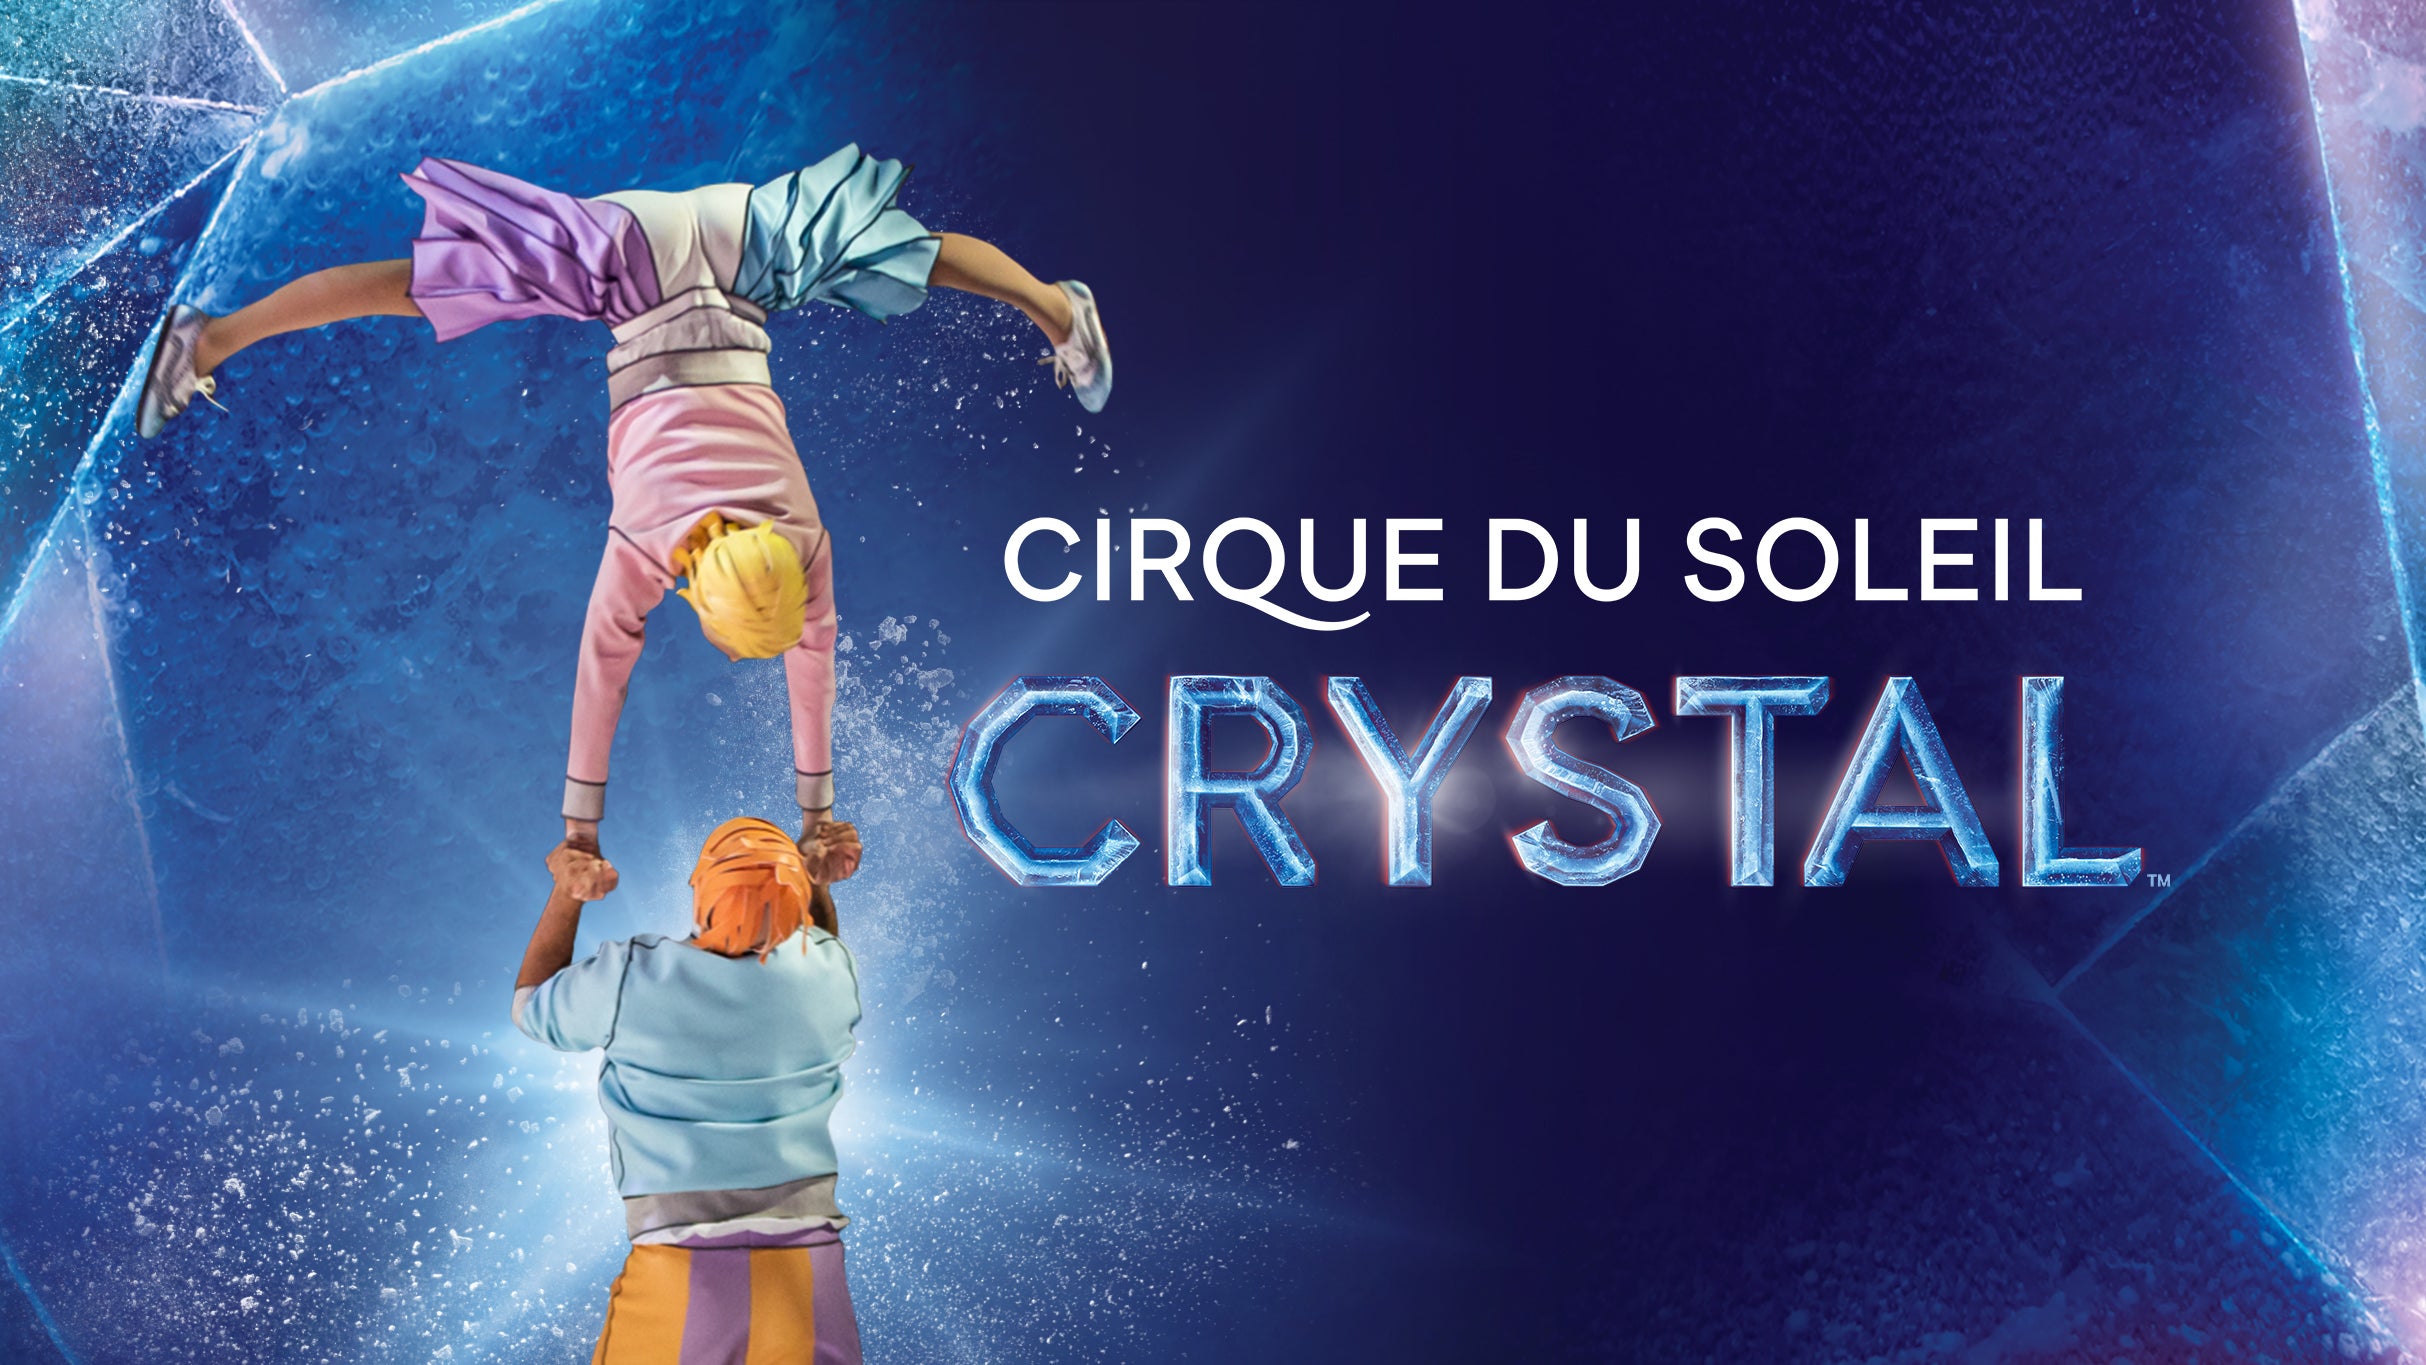 Cirque du Soleil: Crystal in Hershey promo photo for Cirque Club presale offer code